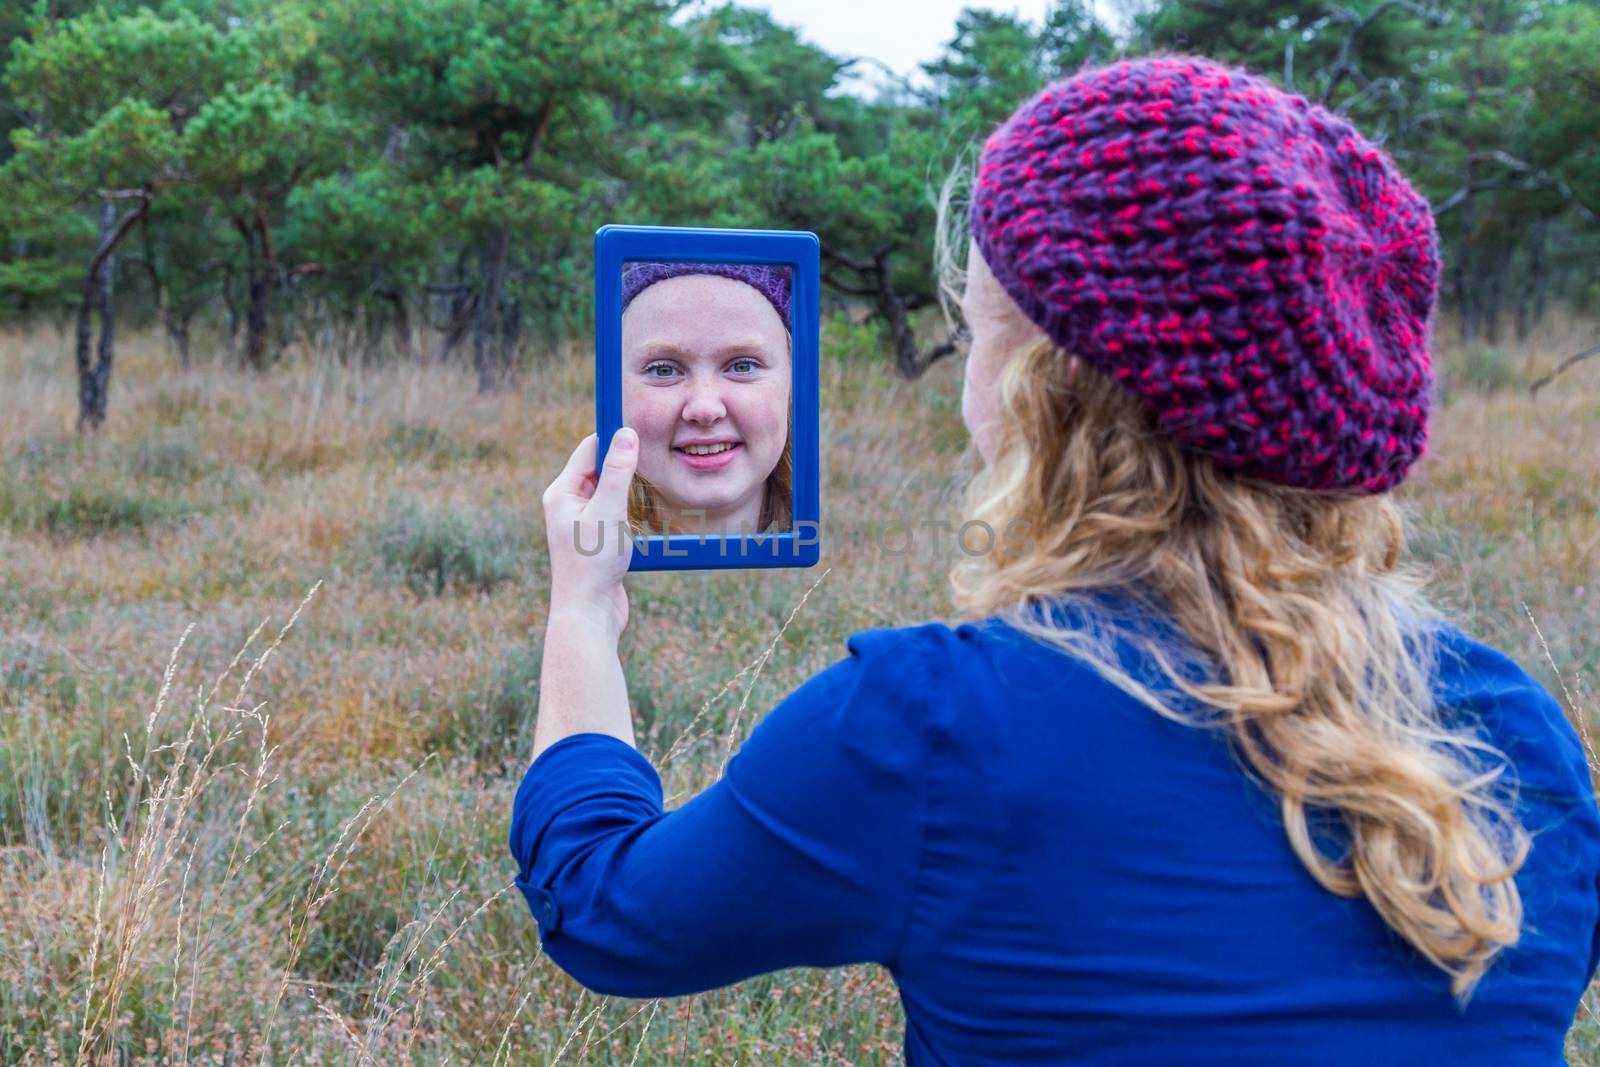 Dutch teenage girl holding mirror in nature and looking at herself